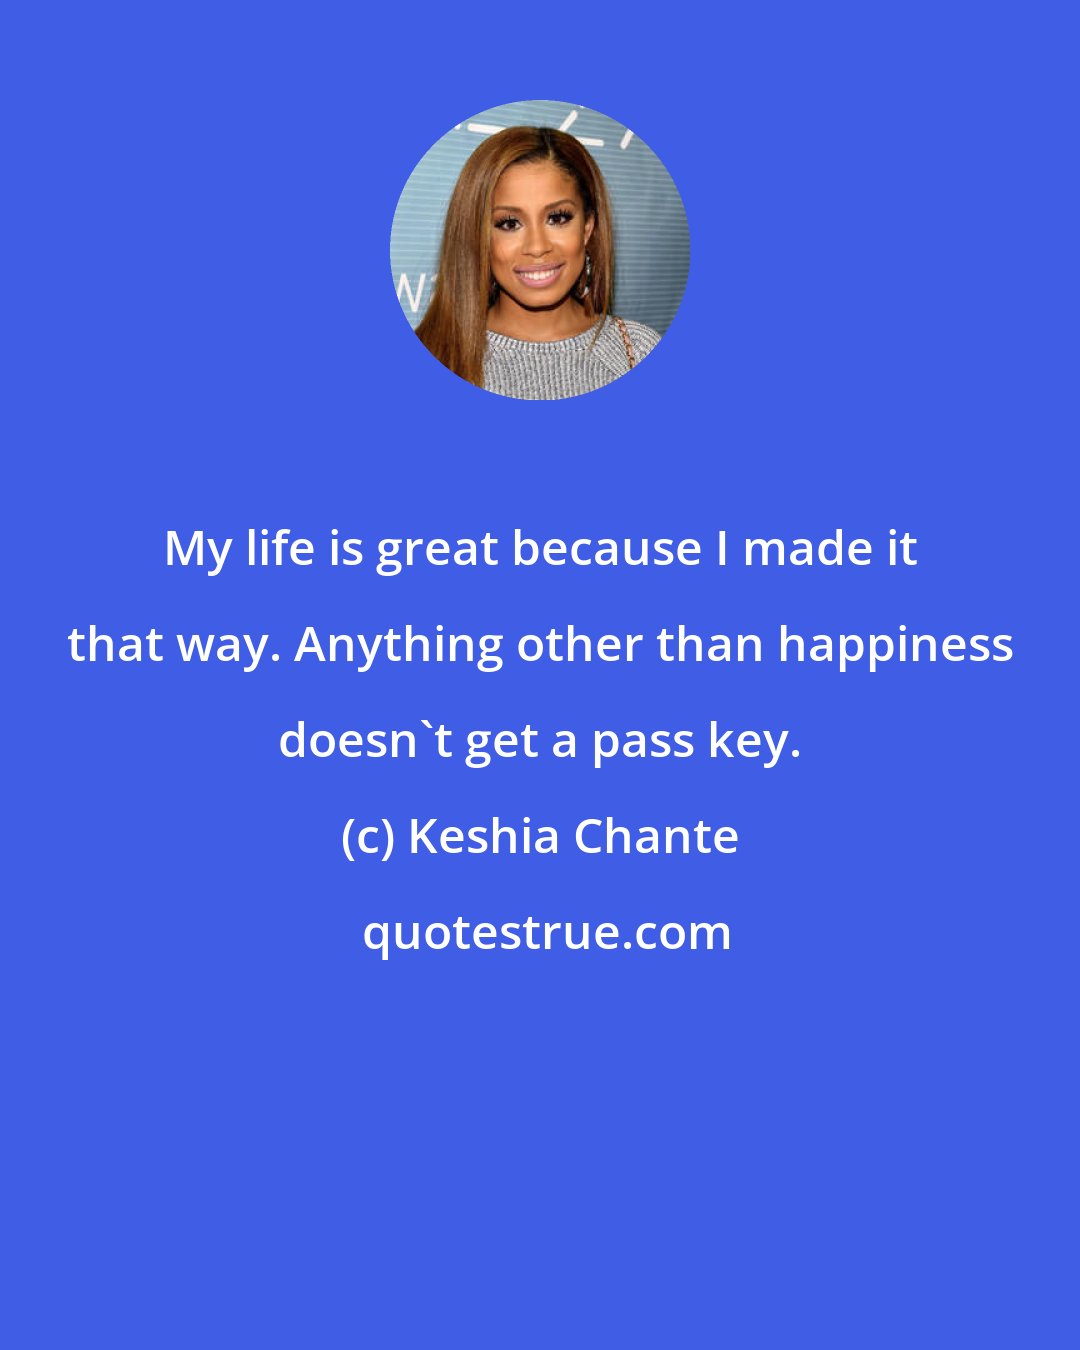 Keshia Chante: My life is great because I made it that way. Anything other than happiness doesn't get a pass key.